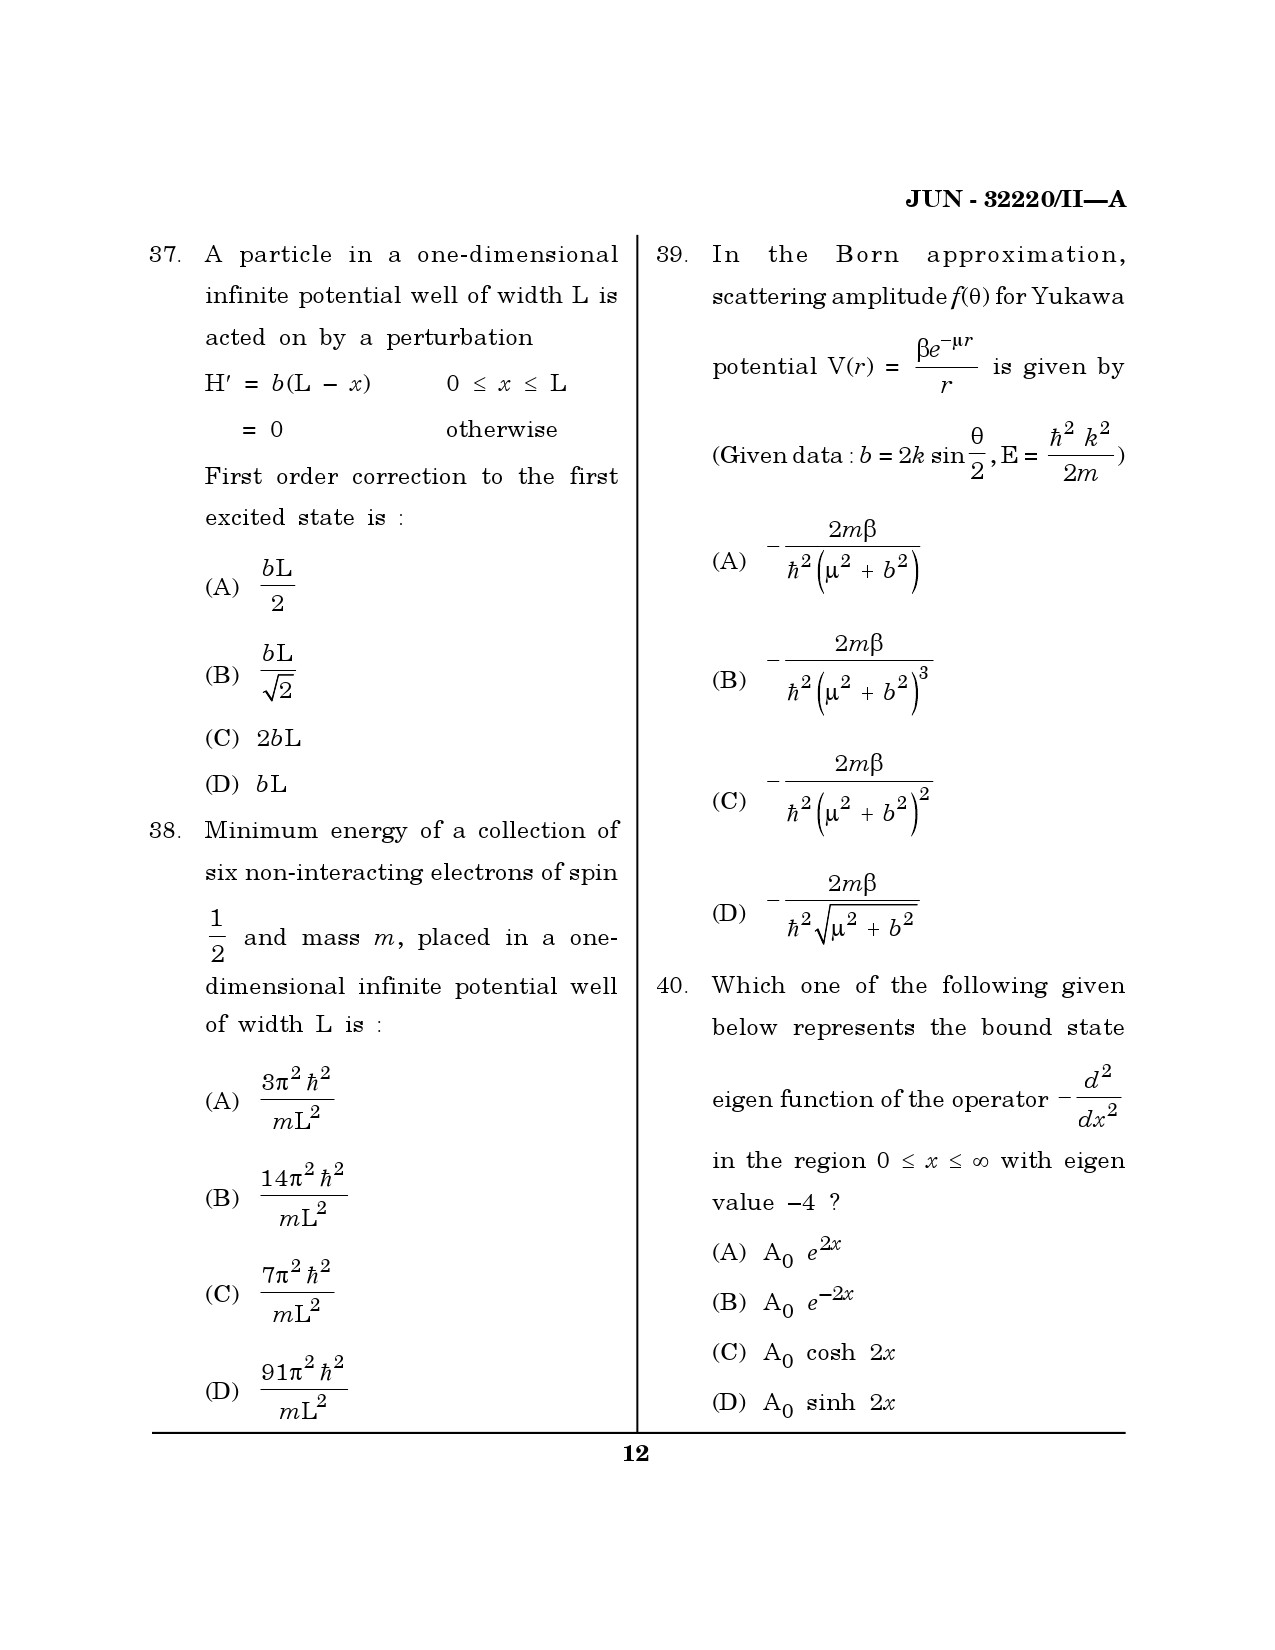 Maharashtra SET Physical Science Question Paper II June 2020 11